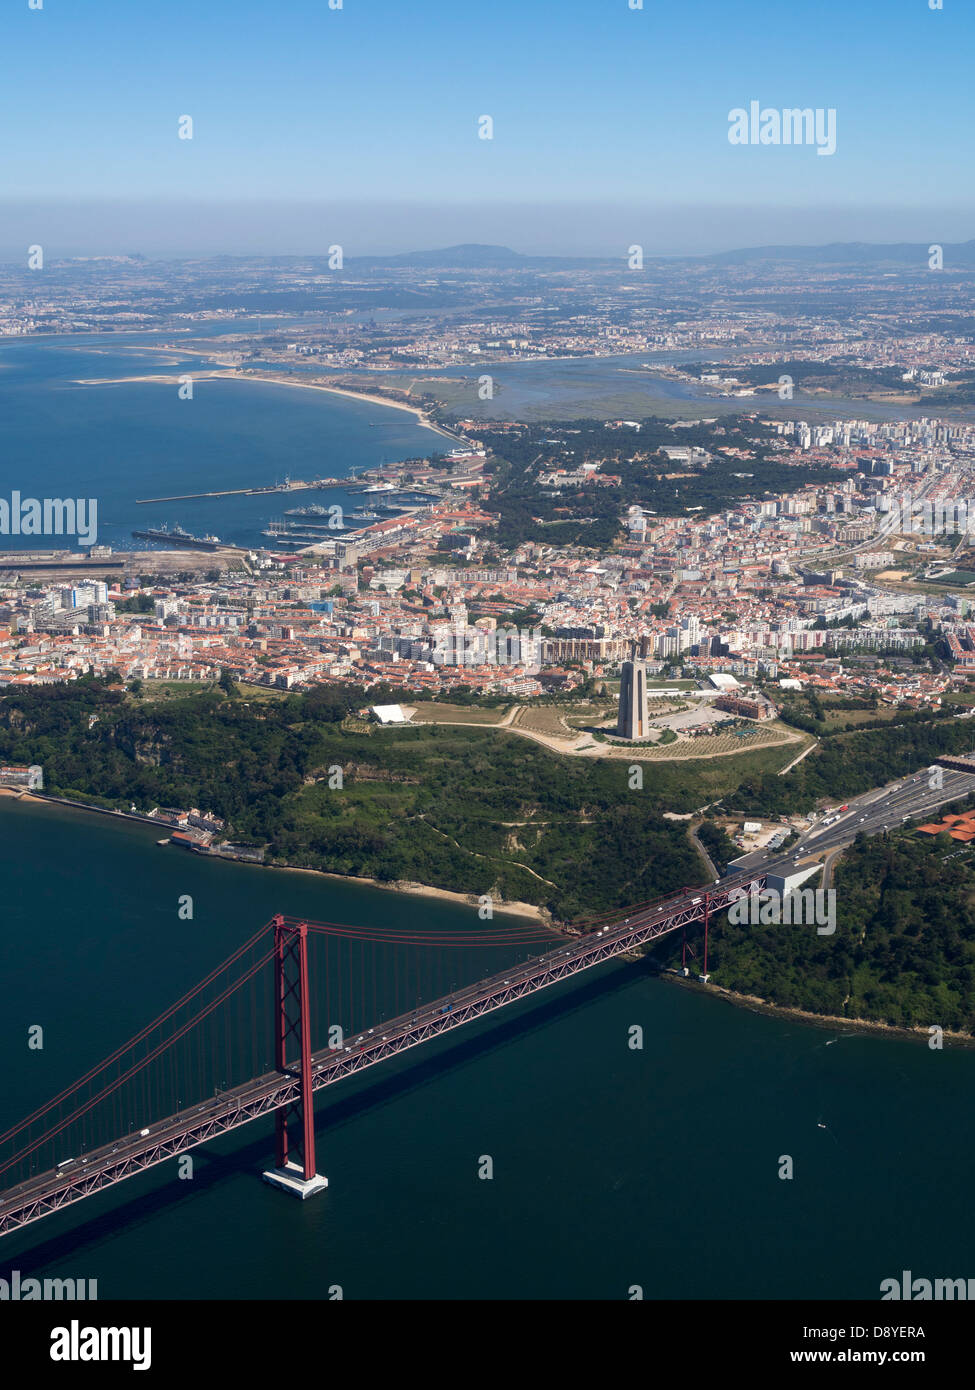 Aerial view of the 25 de Abril bridge over the river Tejo between Lisbon and Almada, Portugal, Europe Stock Photo